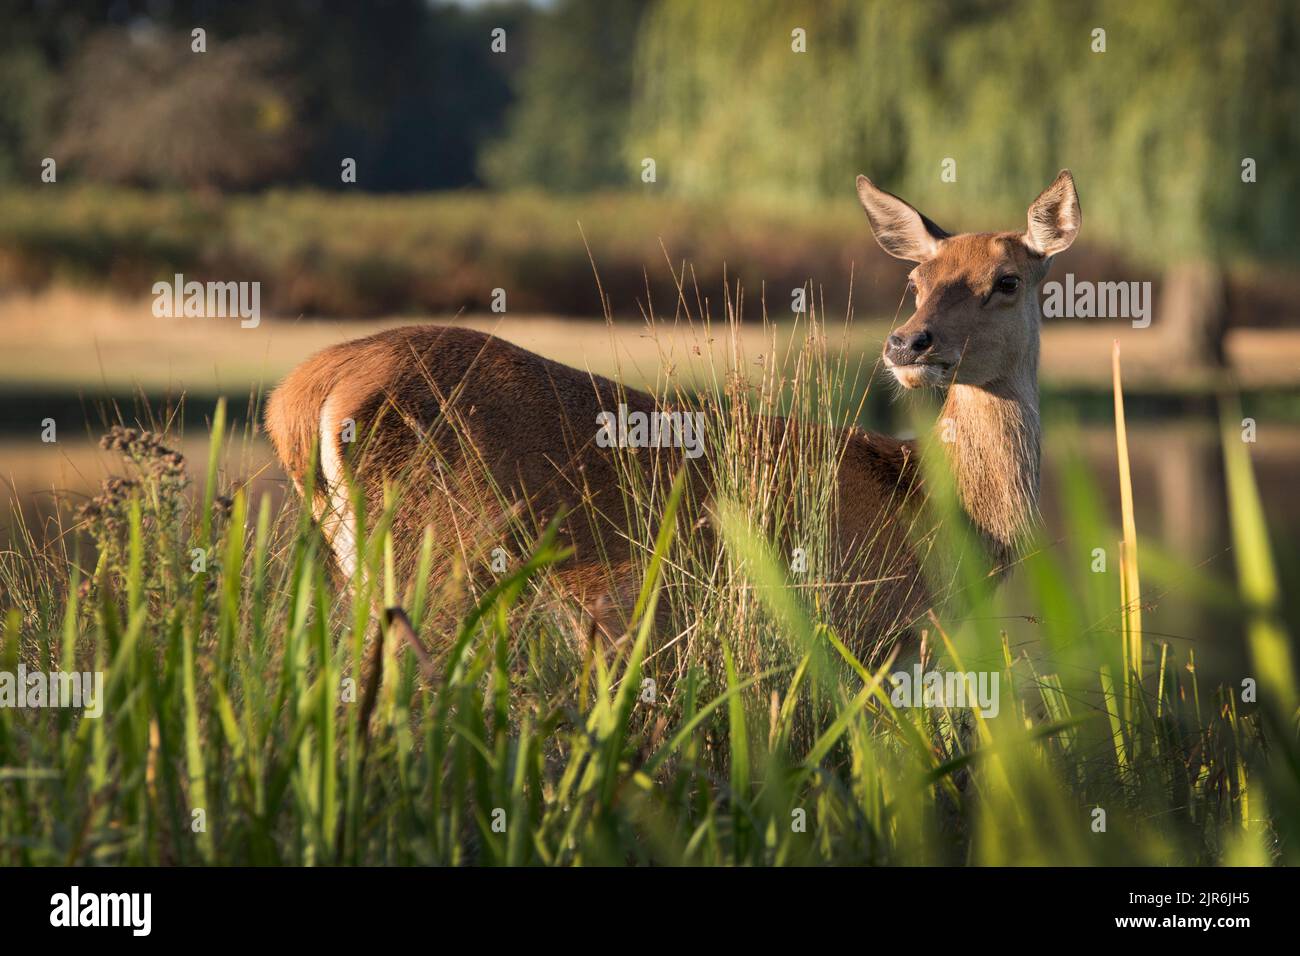 Deer hiding in the long grasses next to pond Stock Photo